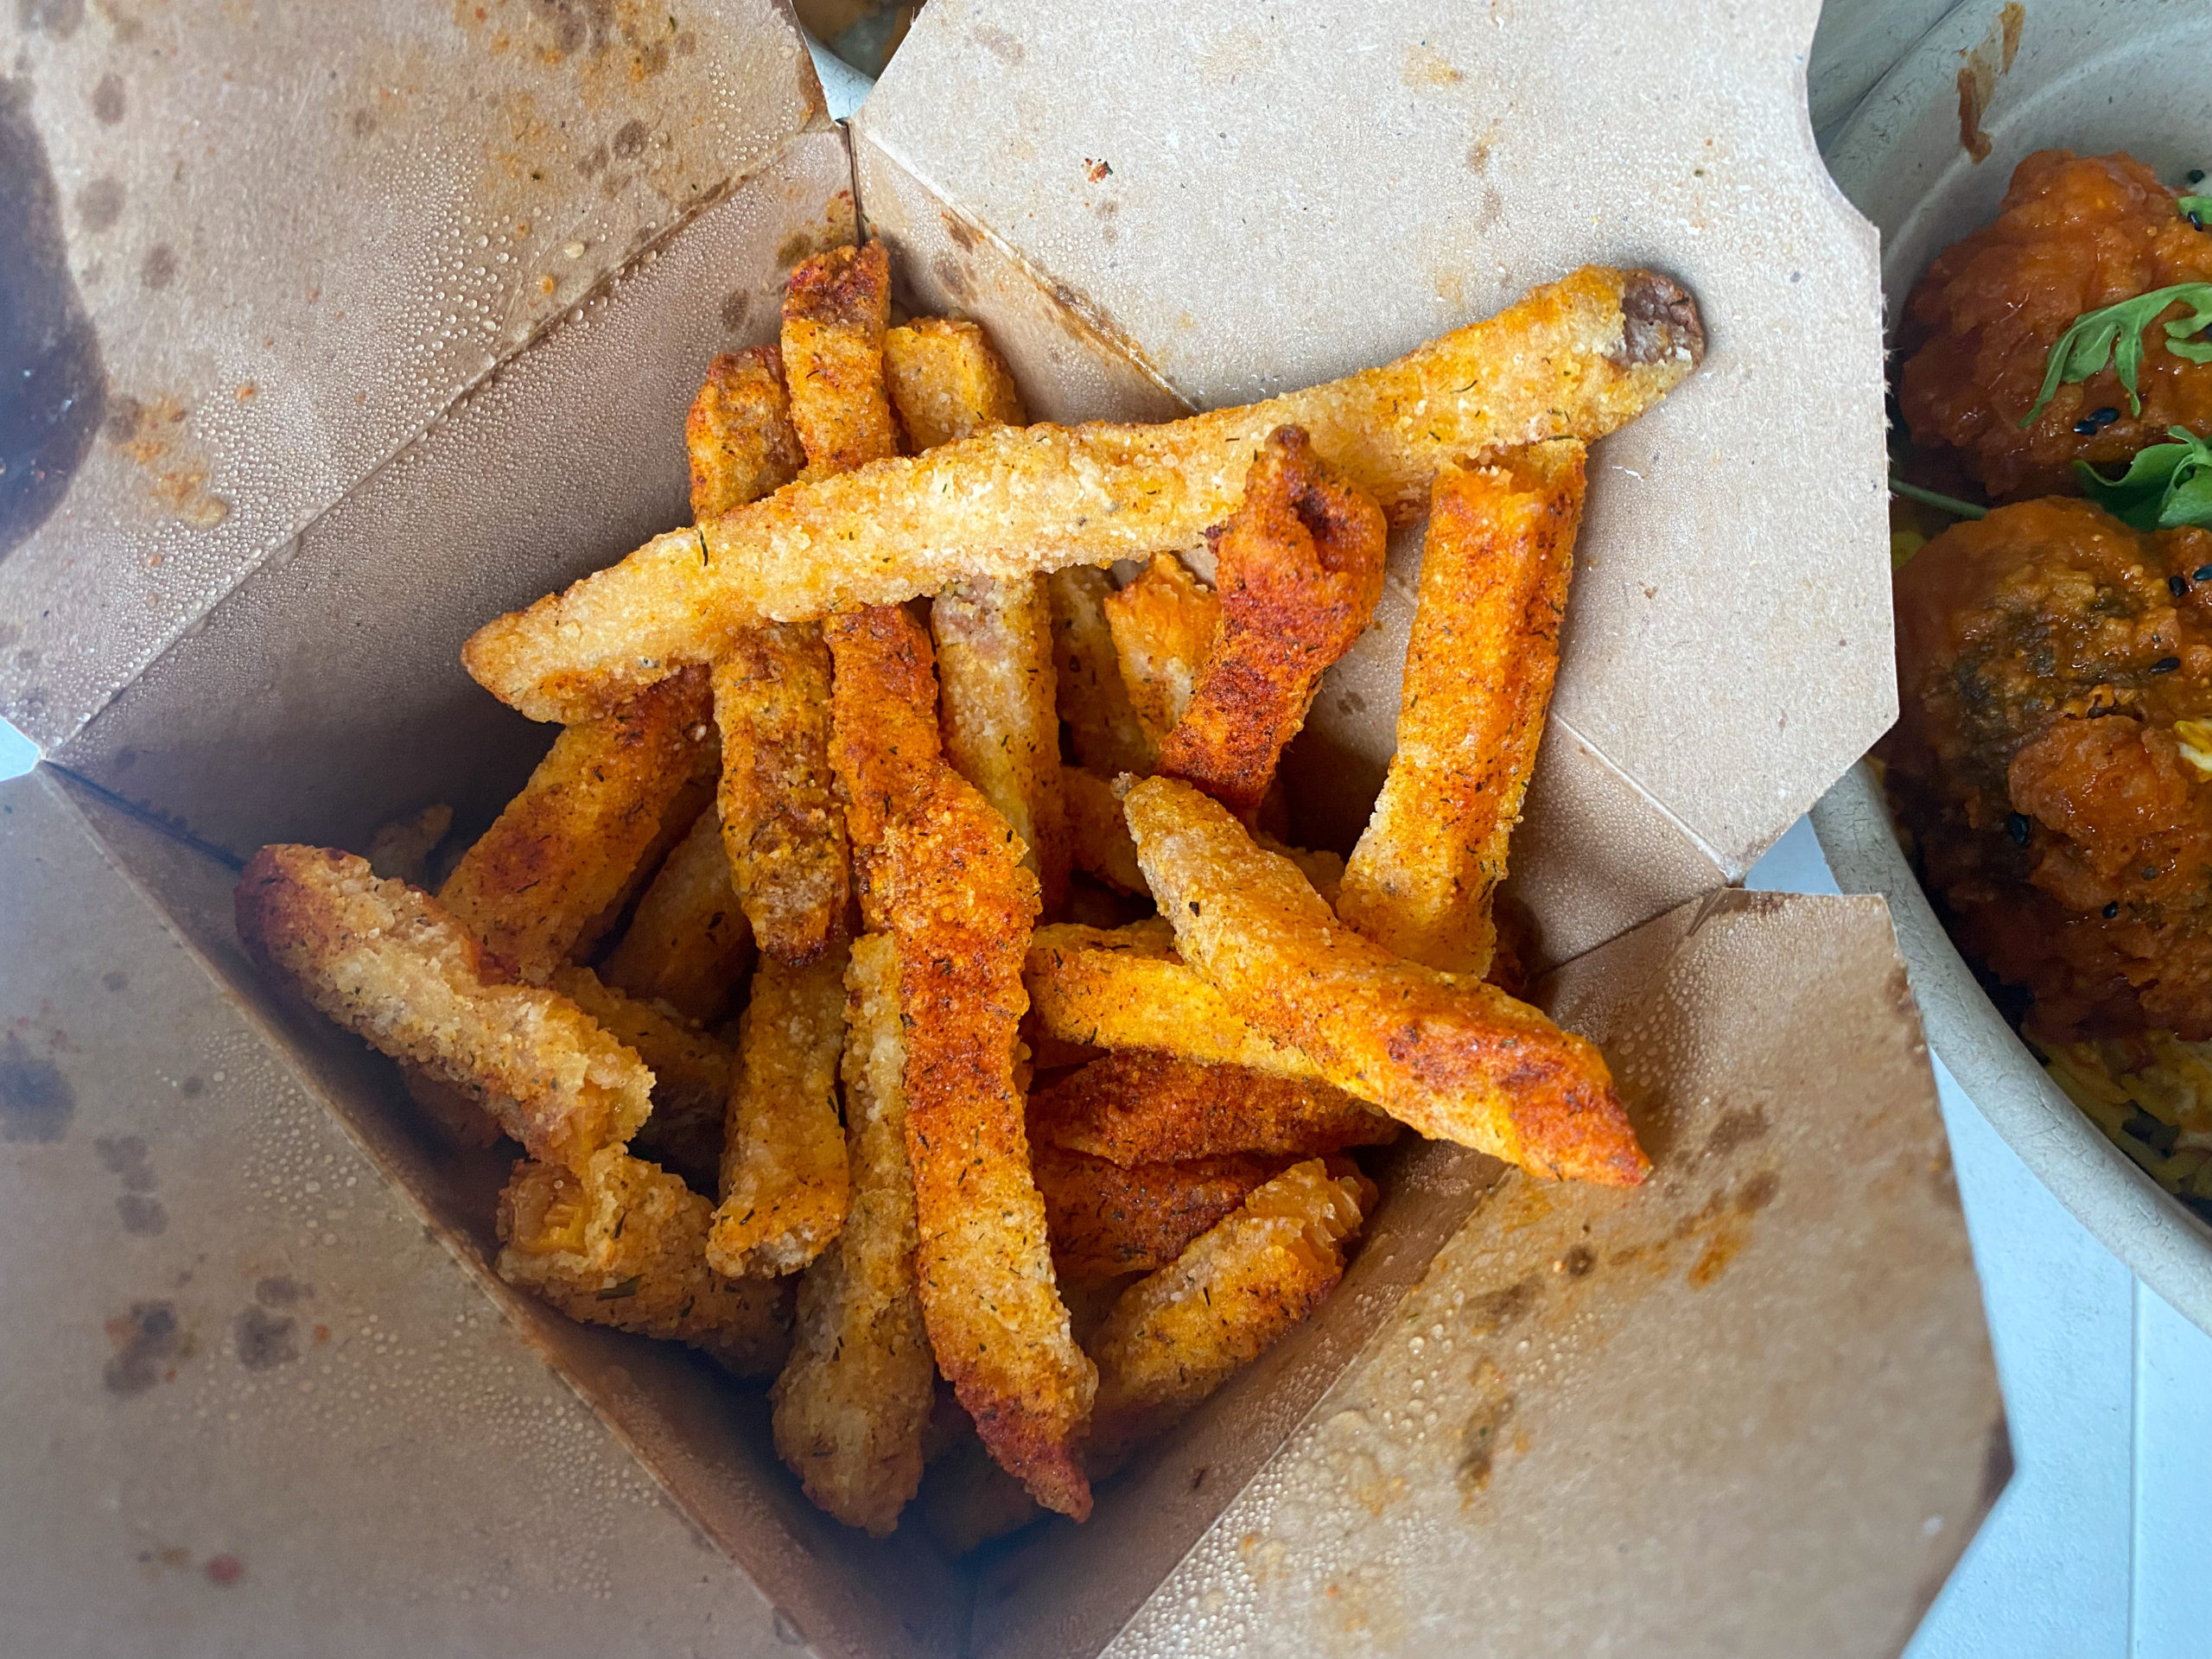 A new item from Freya's - Sweet Potato French Fries